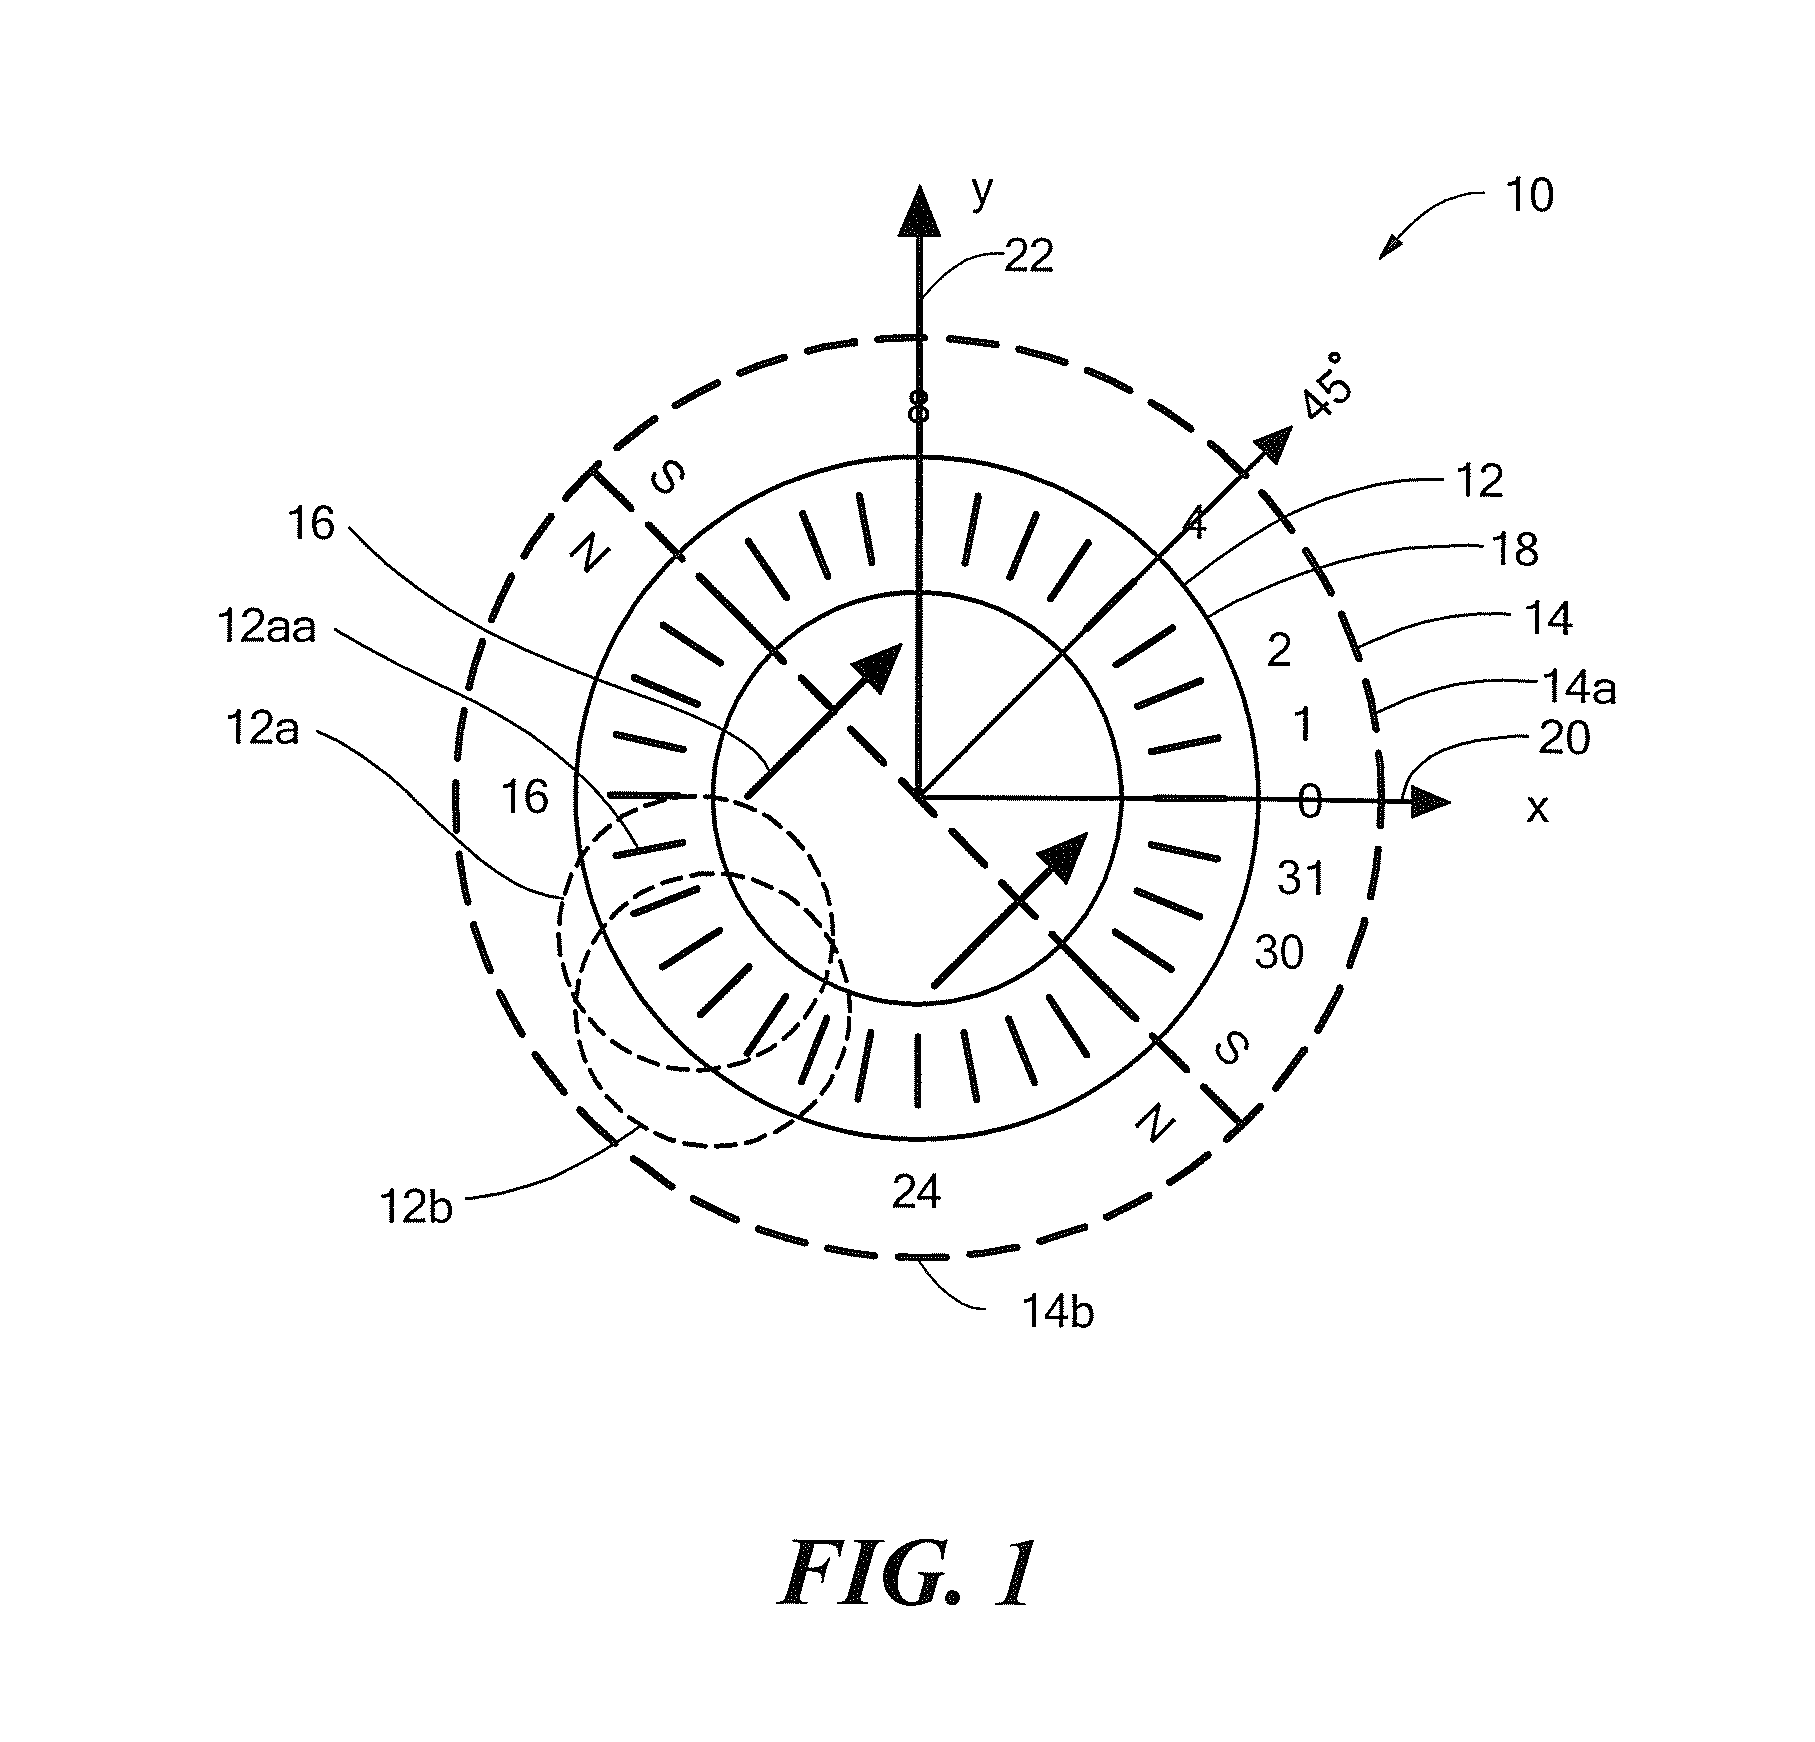 Arrangements for self-testing a circular vertical hall (CVH) sensing element and/or for self-testing a magnetic field sensor that uses a circular vertical hall (CVH) sensing element